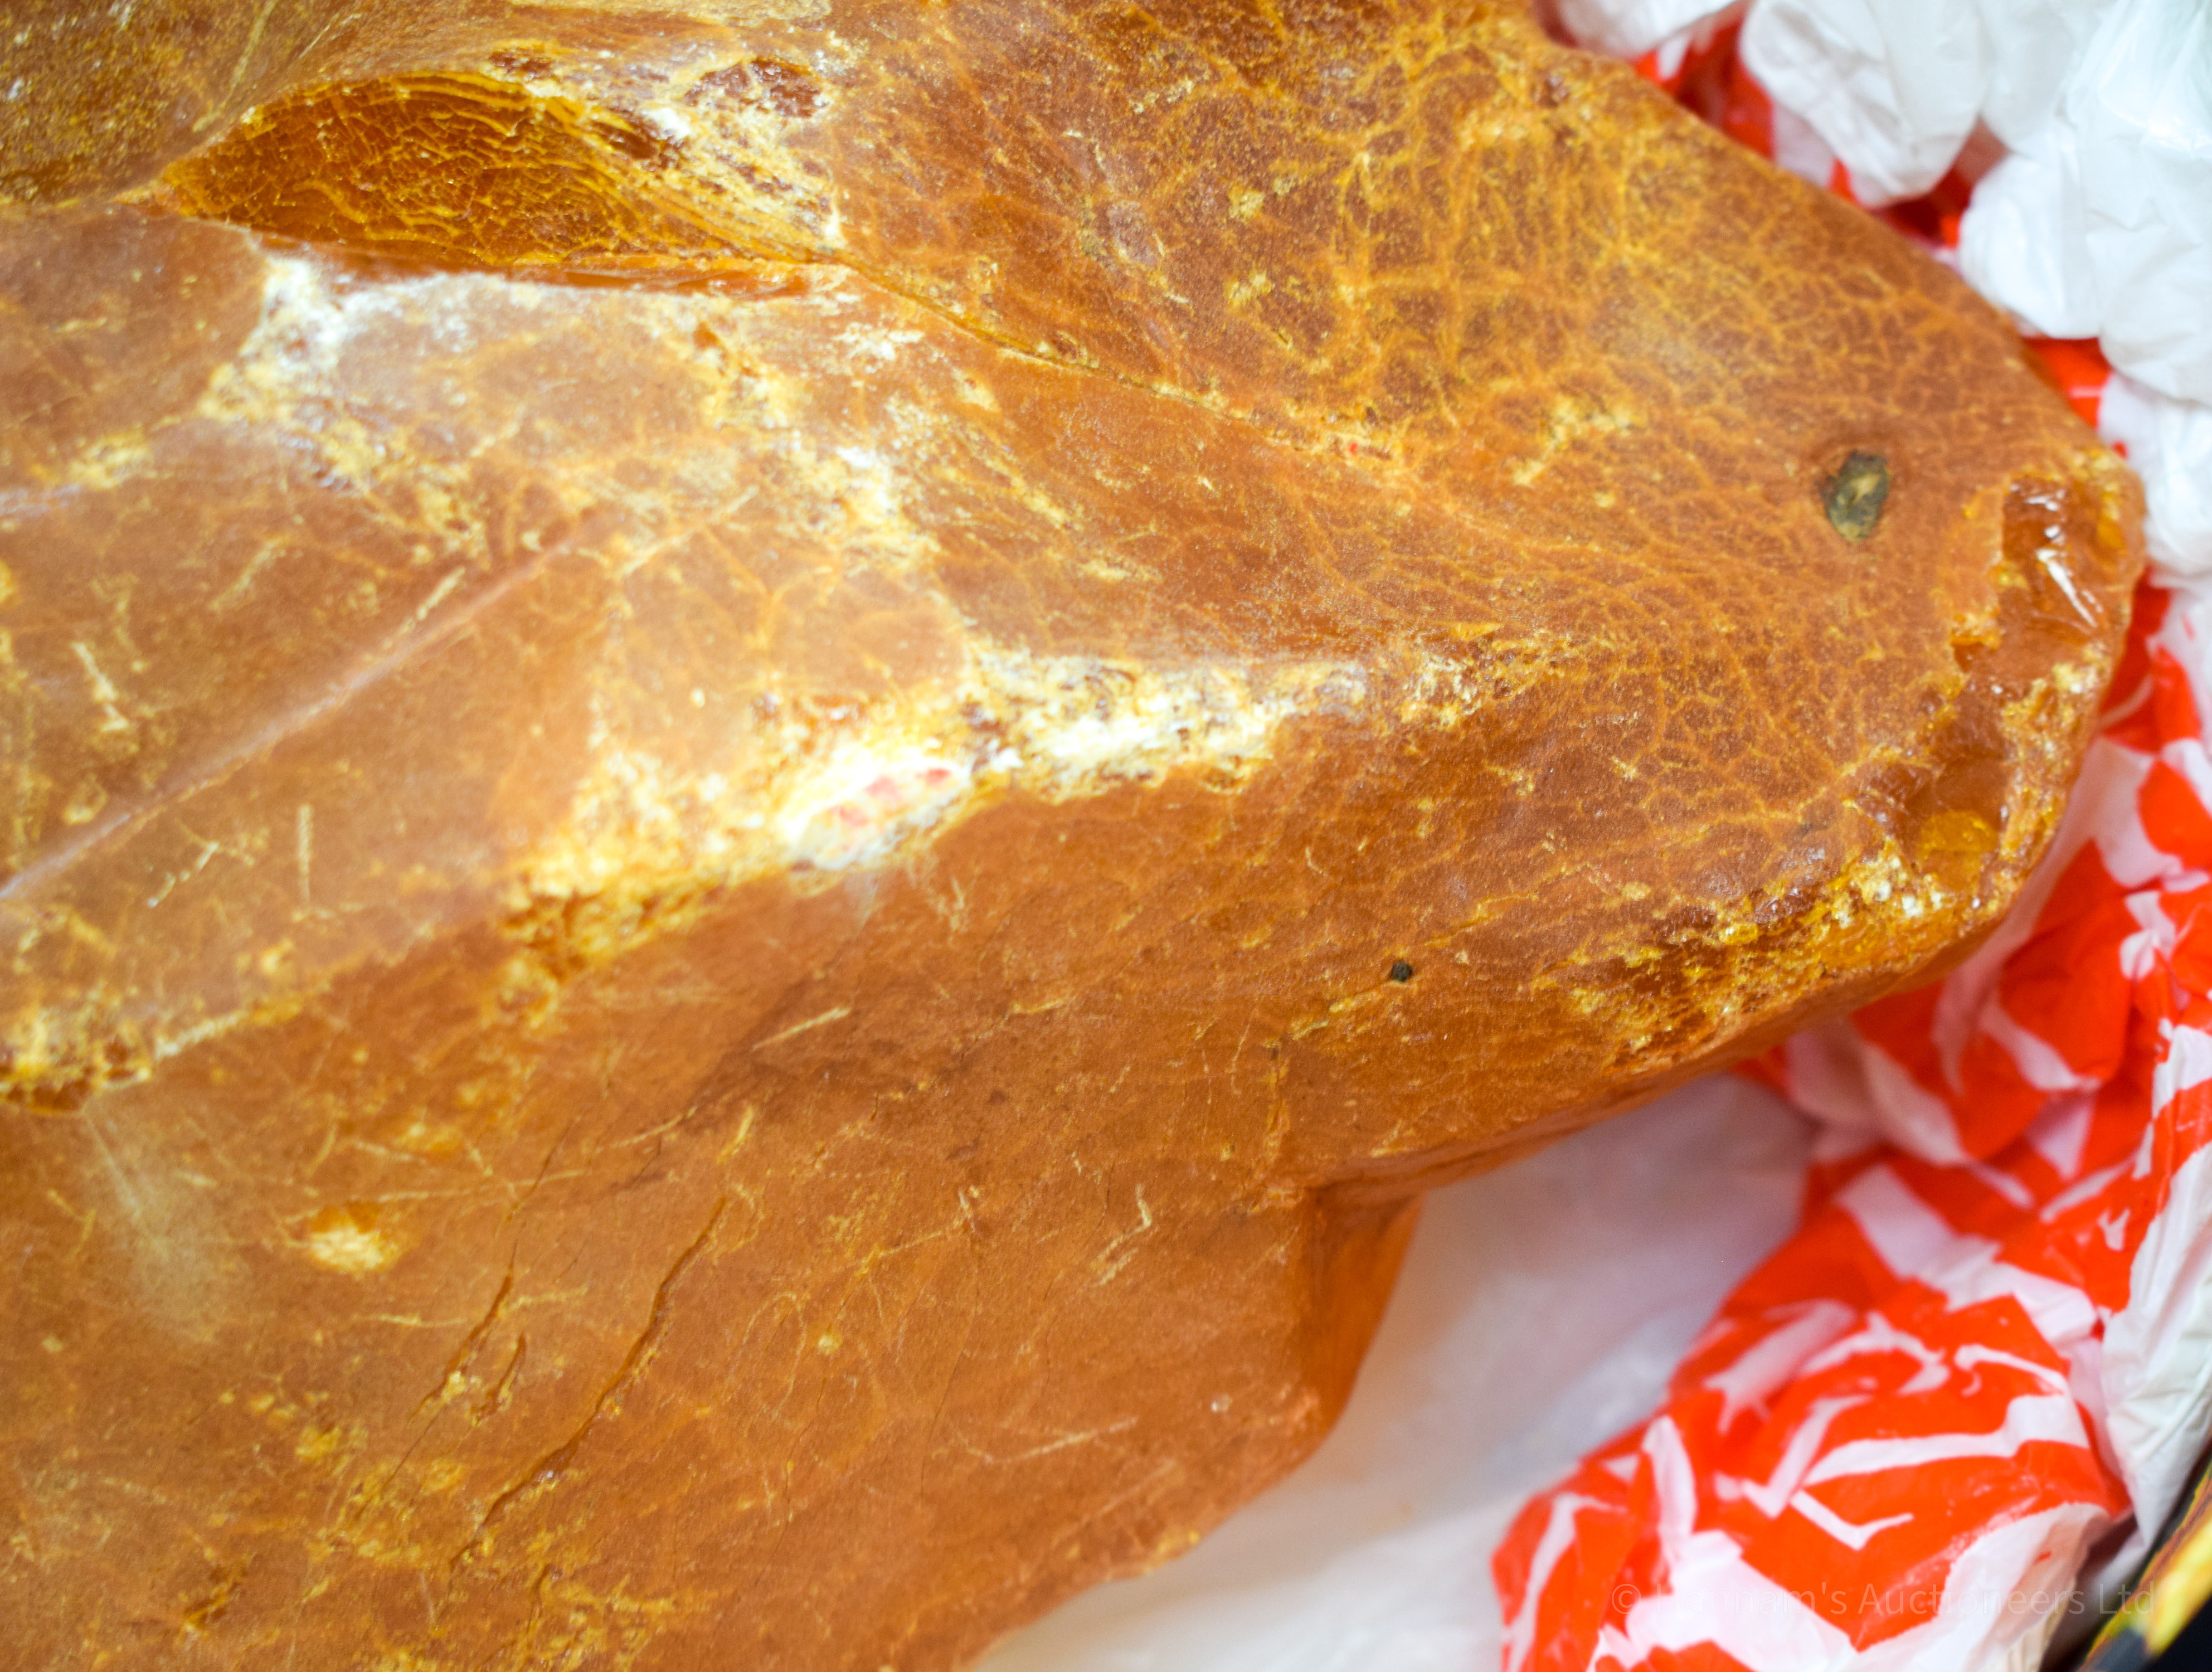 A VERY LARGE AMBER SPECIMEN 2.6 kgs. 20 cm x 16 cm. - Image 7 of 9